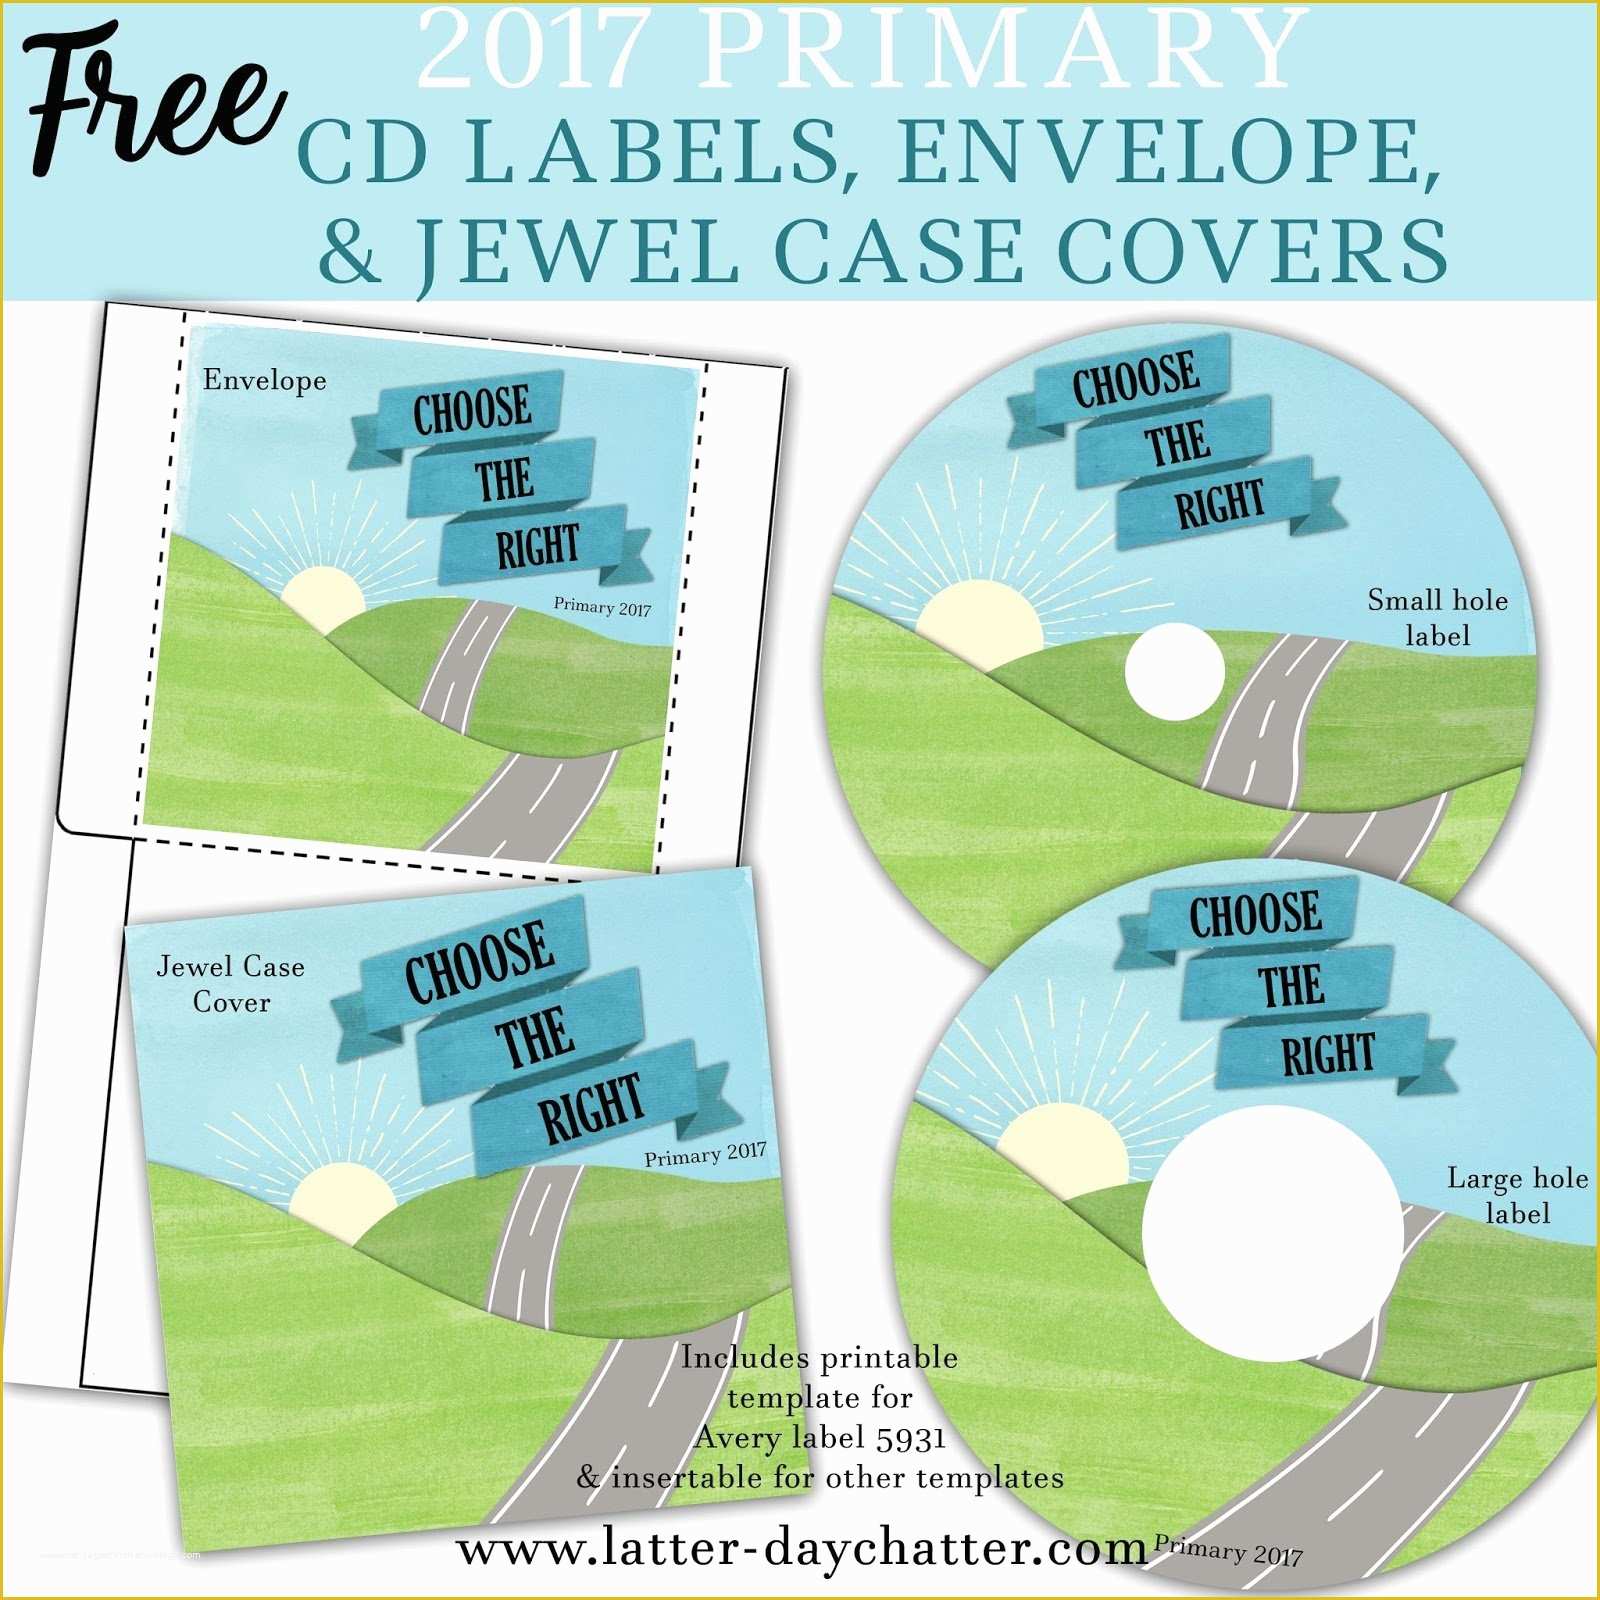 avery-cd-labels-template-5931-download-free-of-avery-template-8931-1000